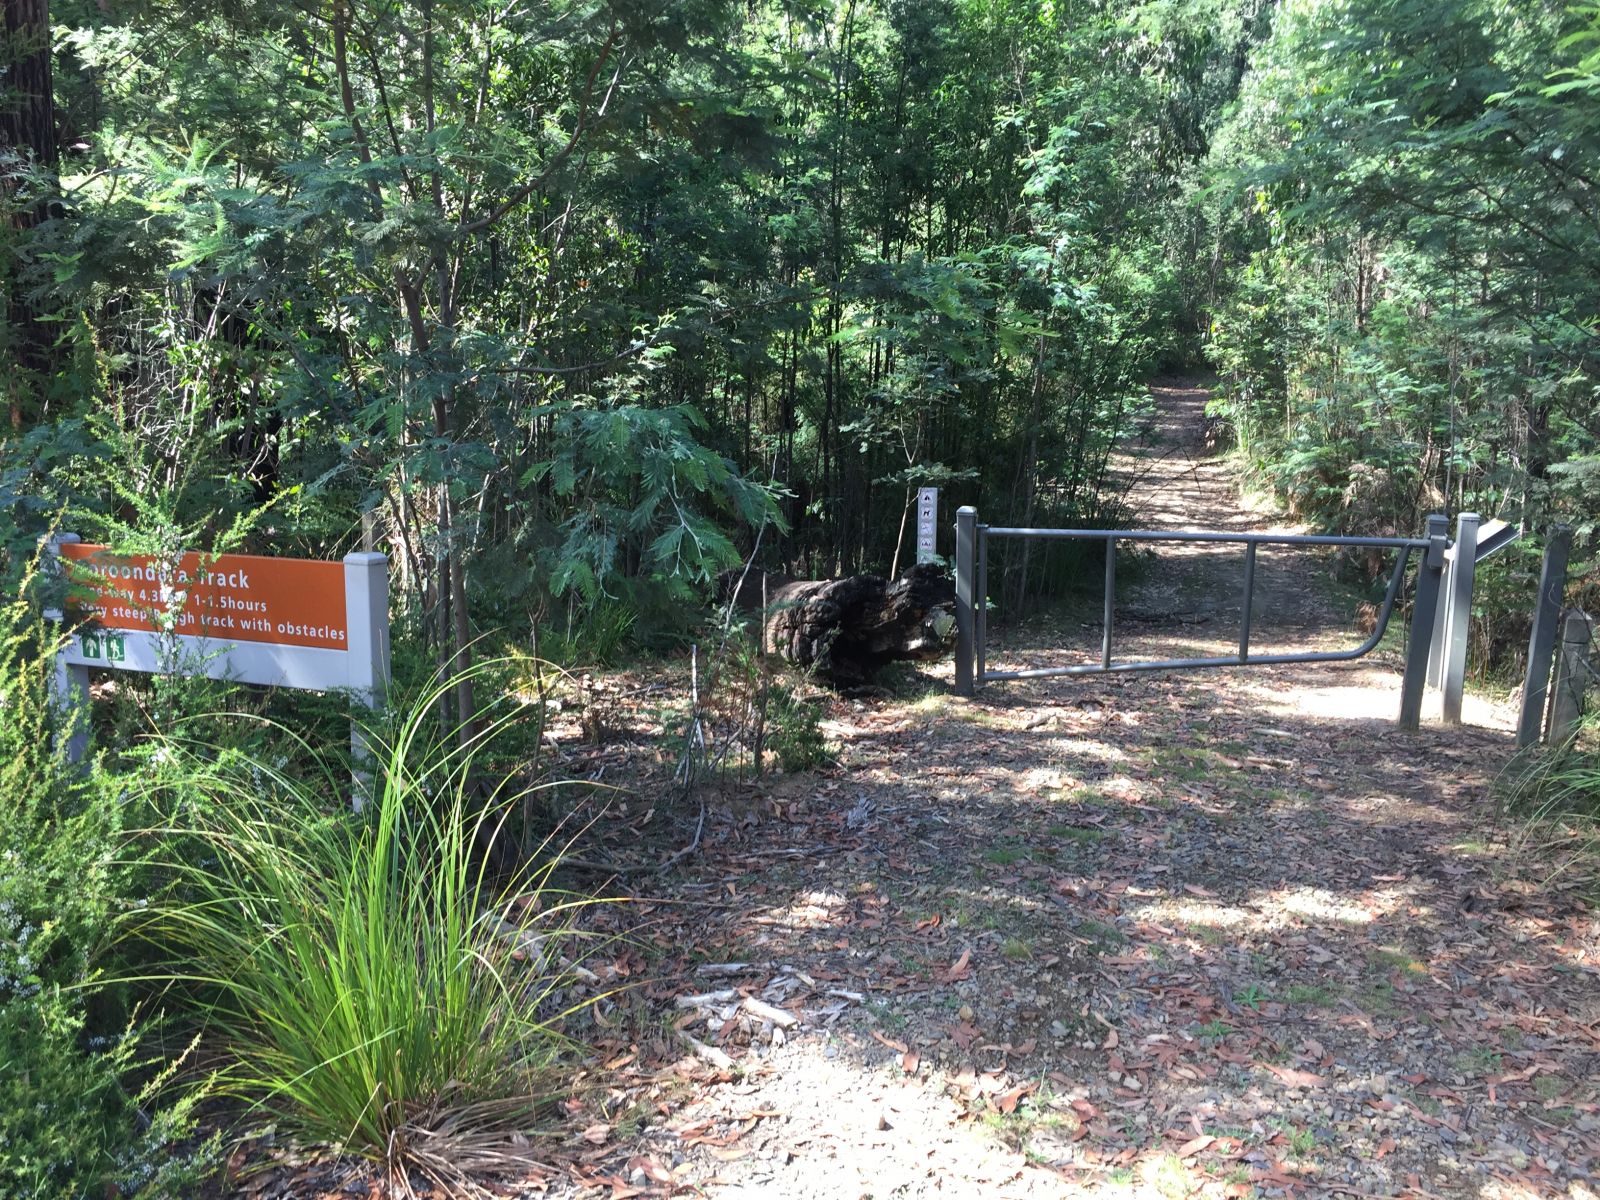 A metal gate at the start of a cleared dirt path through trees